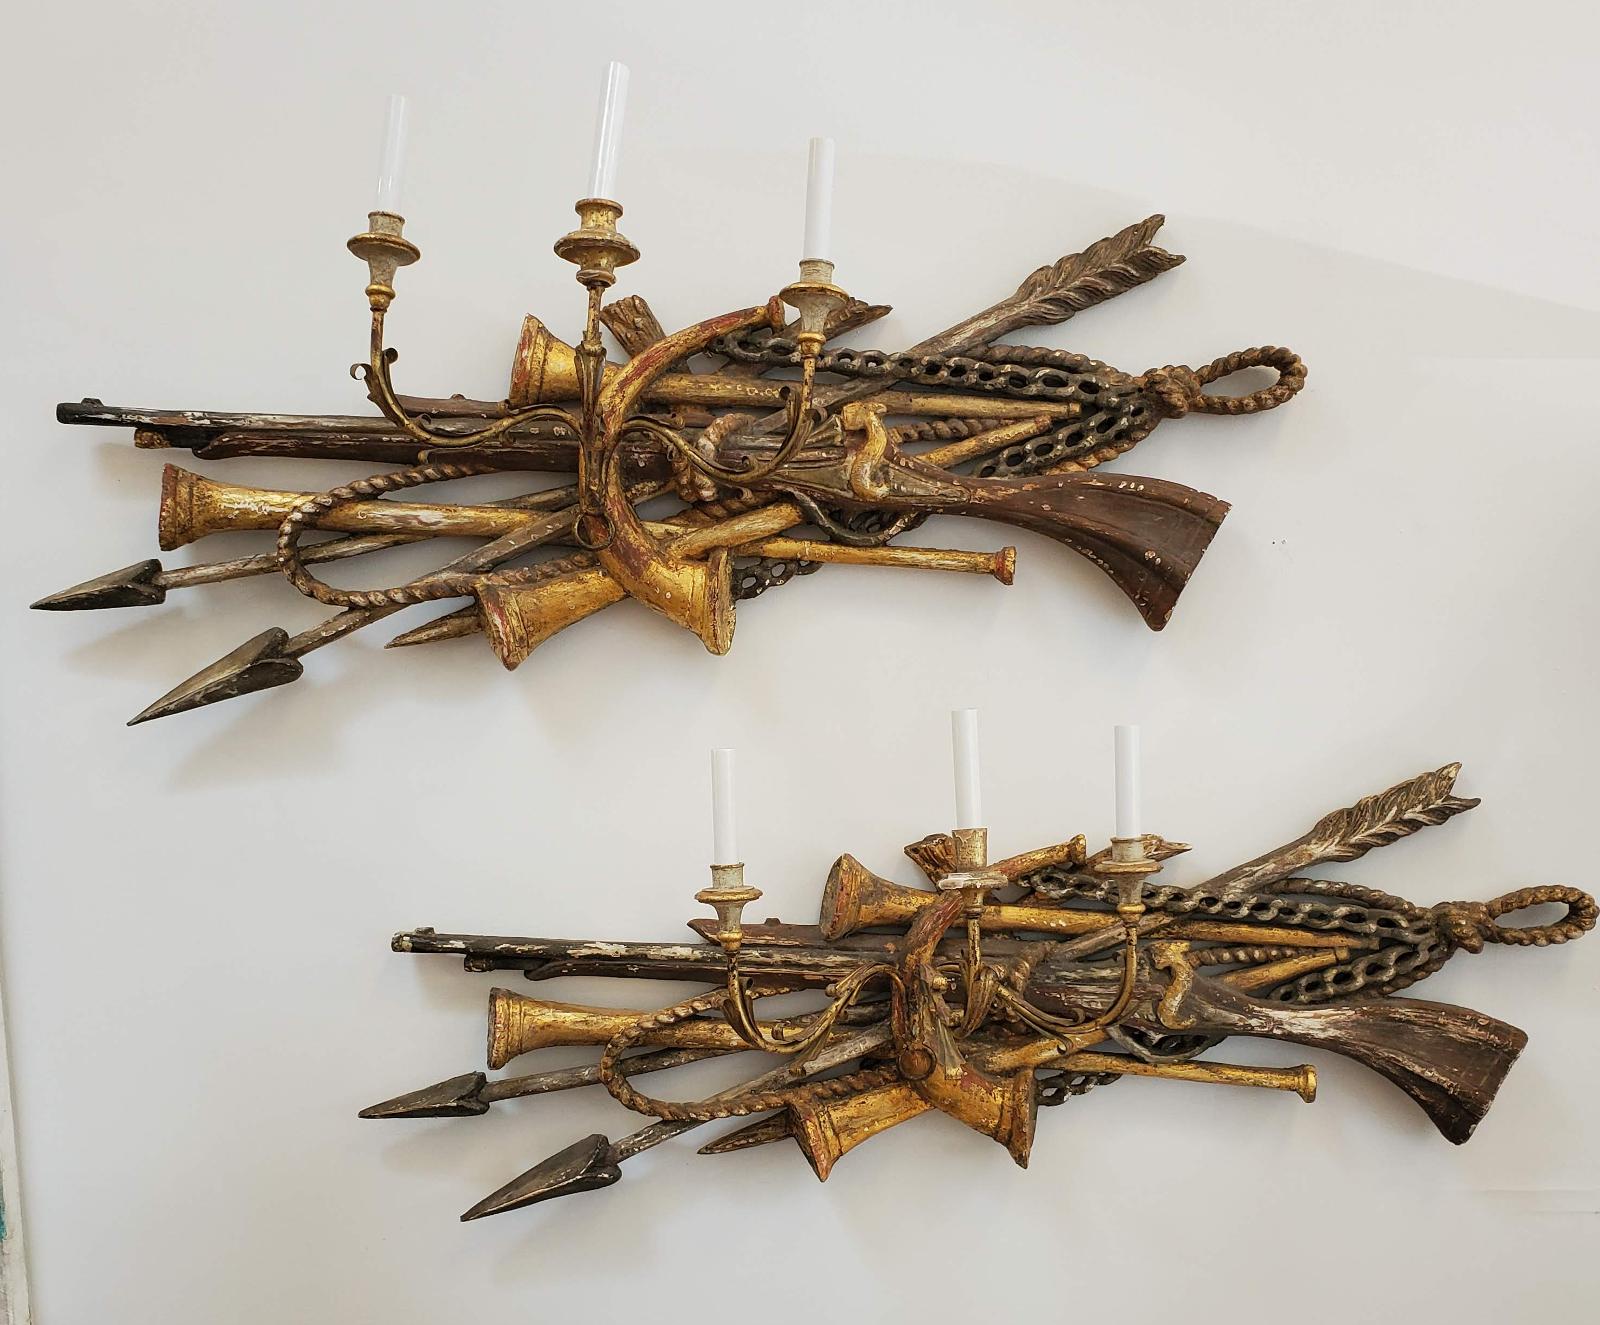 Extraordinary pair of Louis XVI style carved gilded wall sconces. Unusual large proportions. Beautifully carved detail depicting rifles, swords, hunting horns, spears, rope and chain. Each painted and gilded with three candle arms and electrified